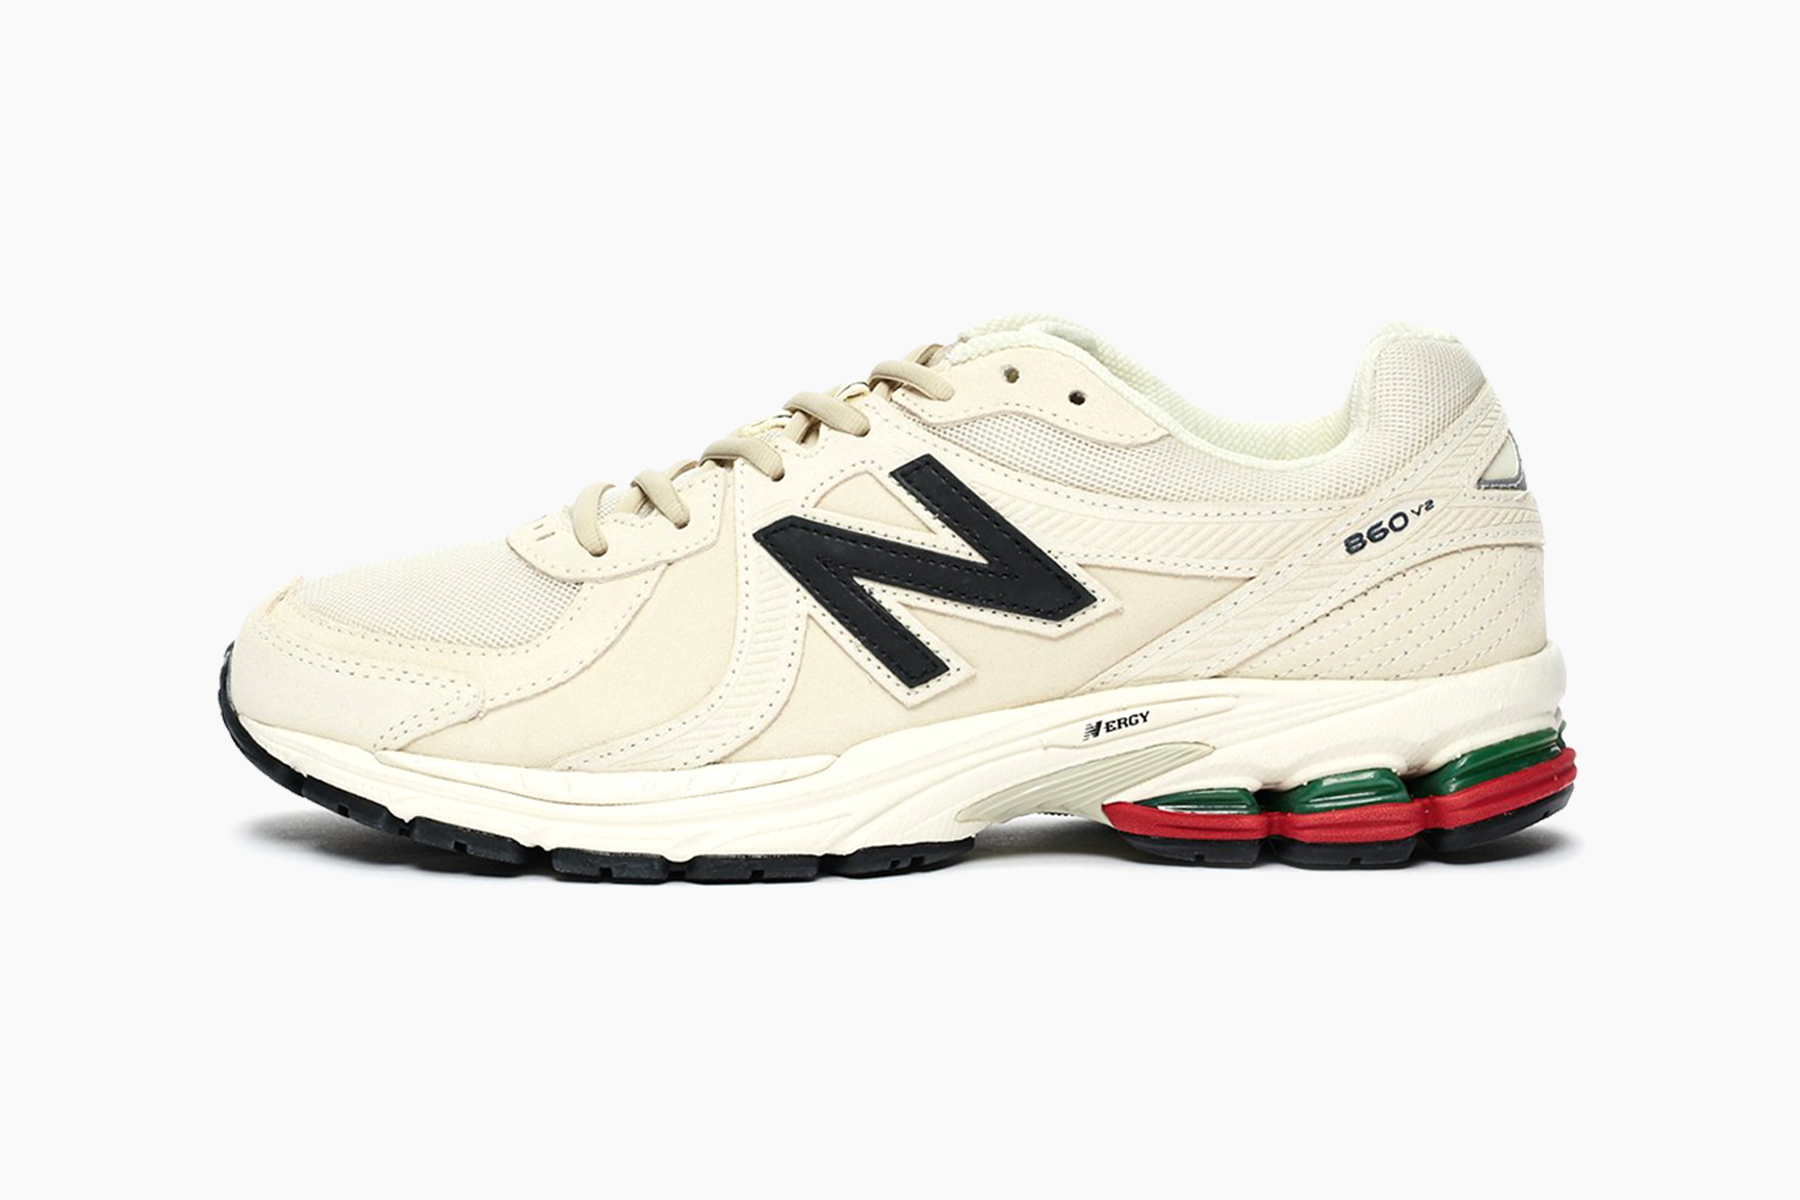 New Balance Delivers Two Stripped-back 